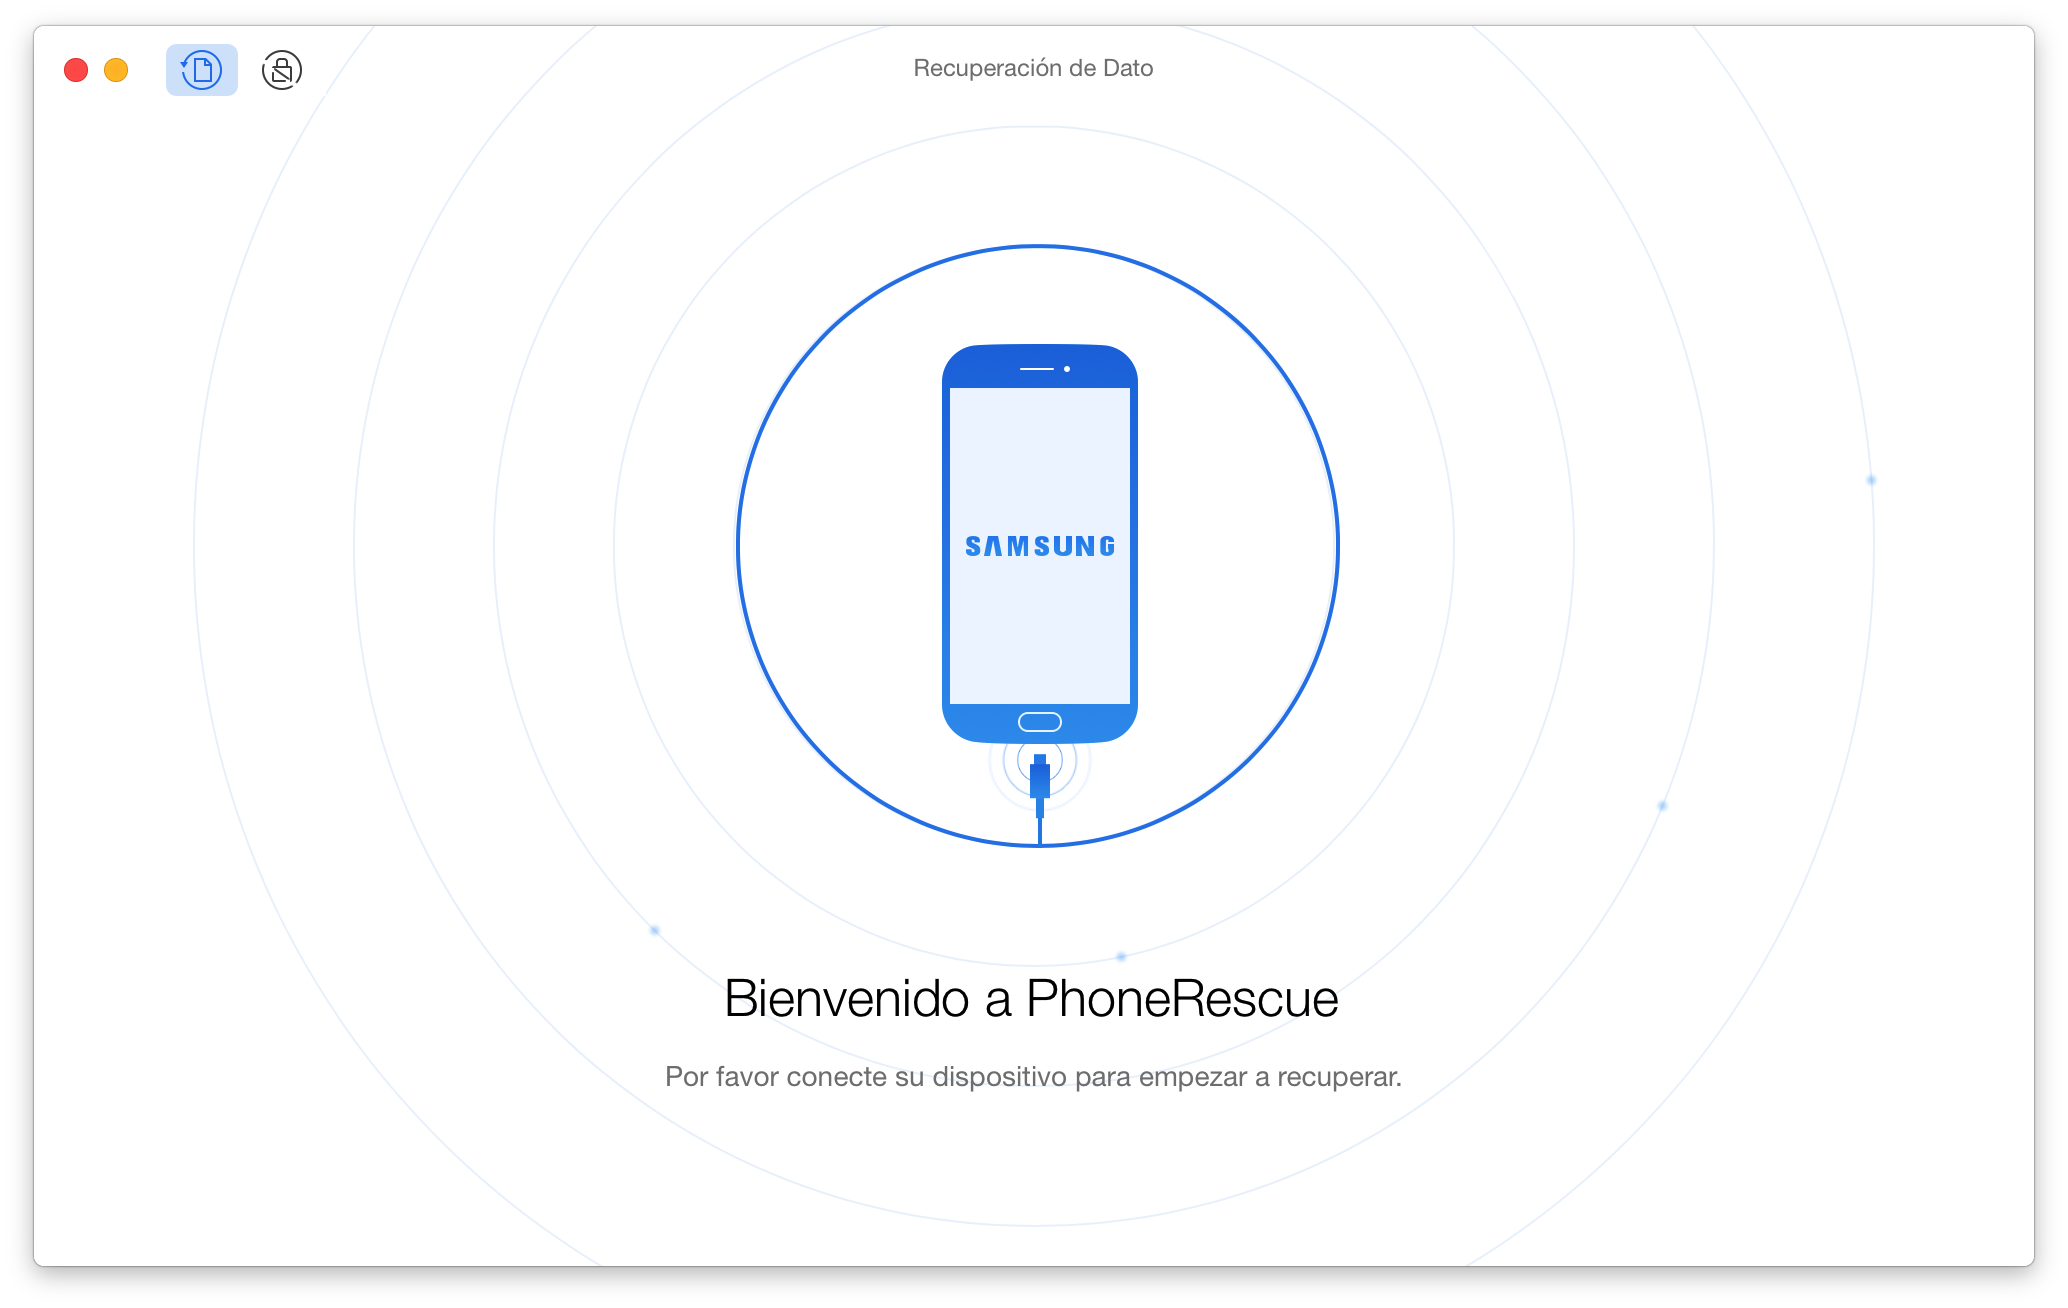 The welcome interface of PhoneRescue for Google